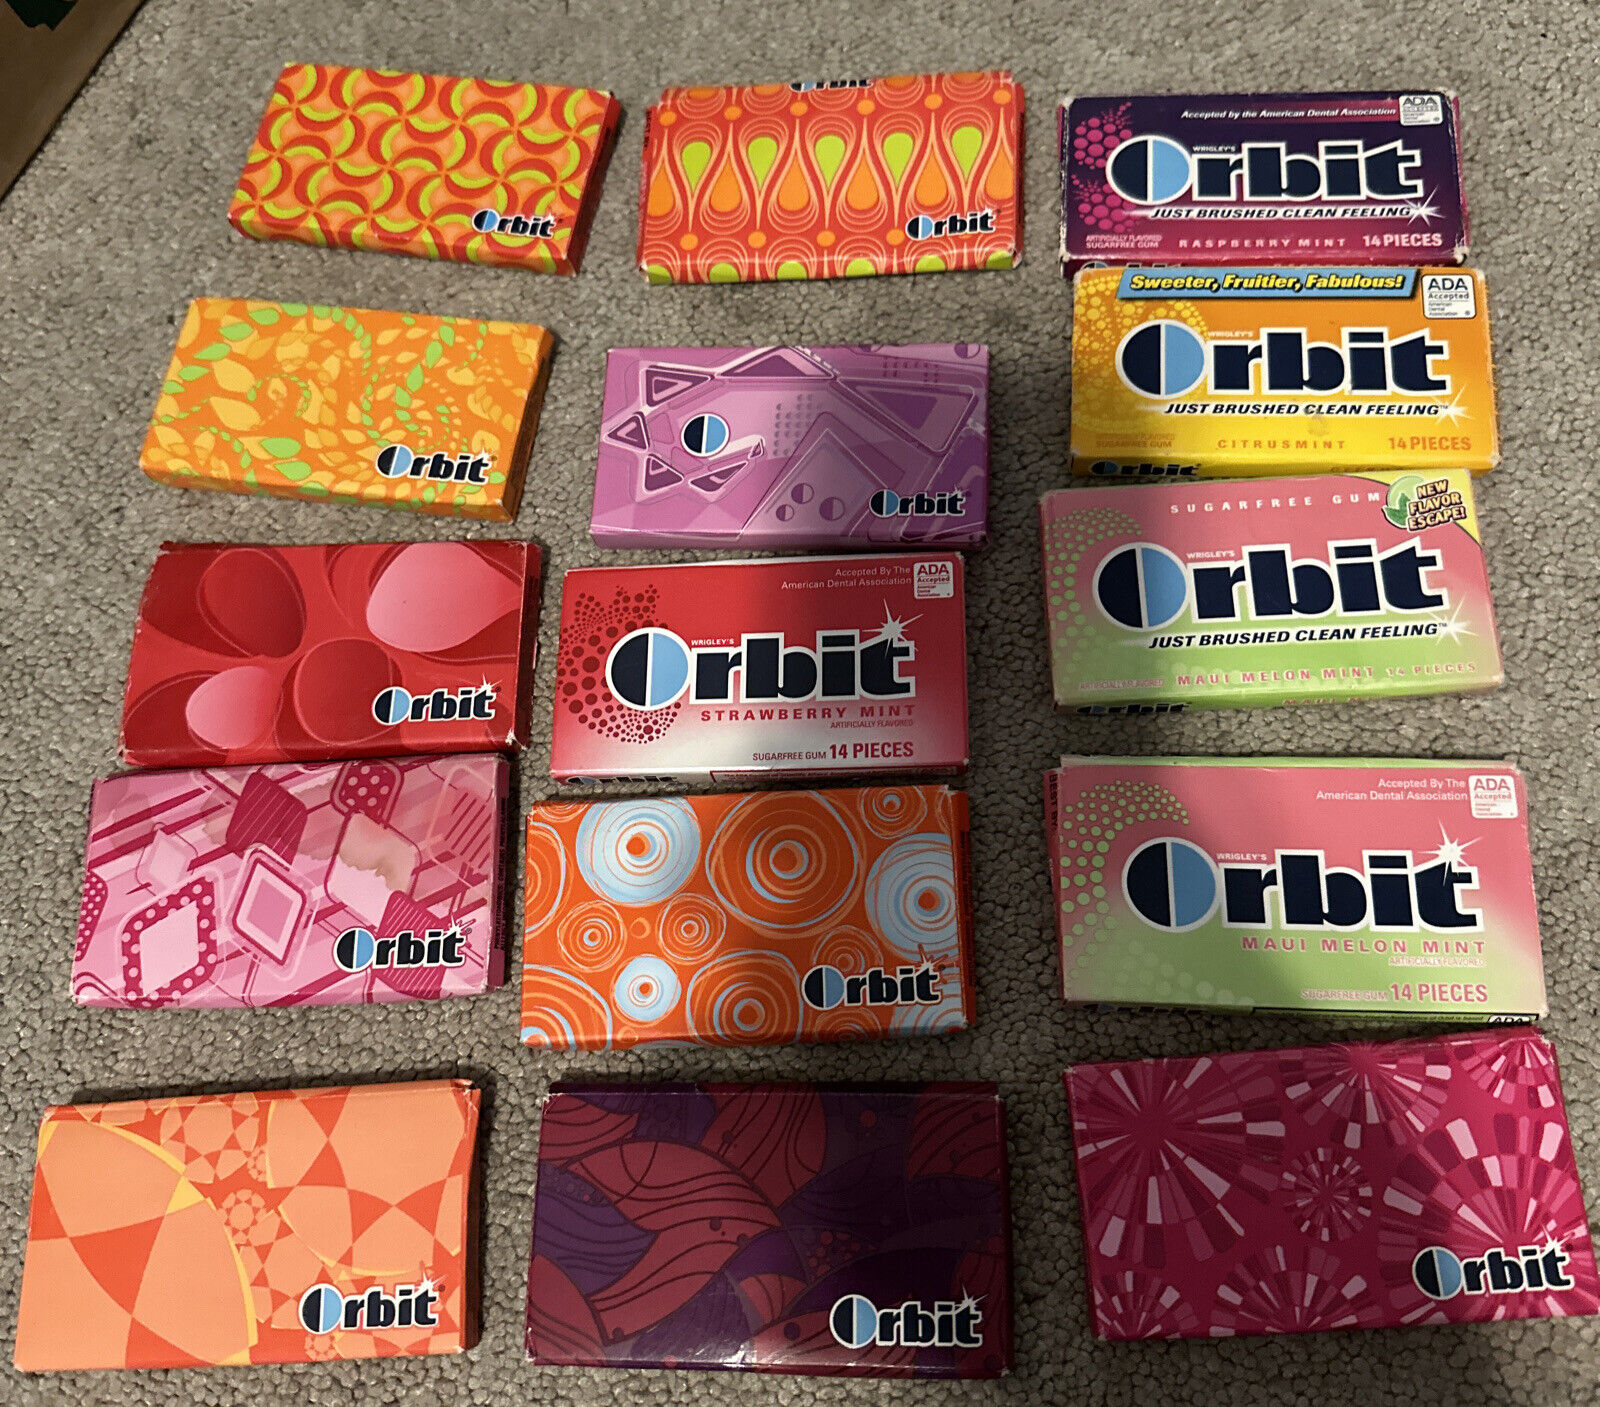 Vintage Orbit Gum (NOT SEALED THESE ARE OPENED VINTAGE BOXES OF EXPIRED GUM)